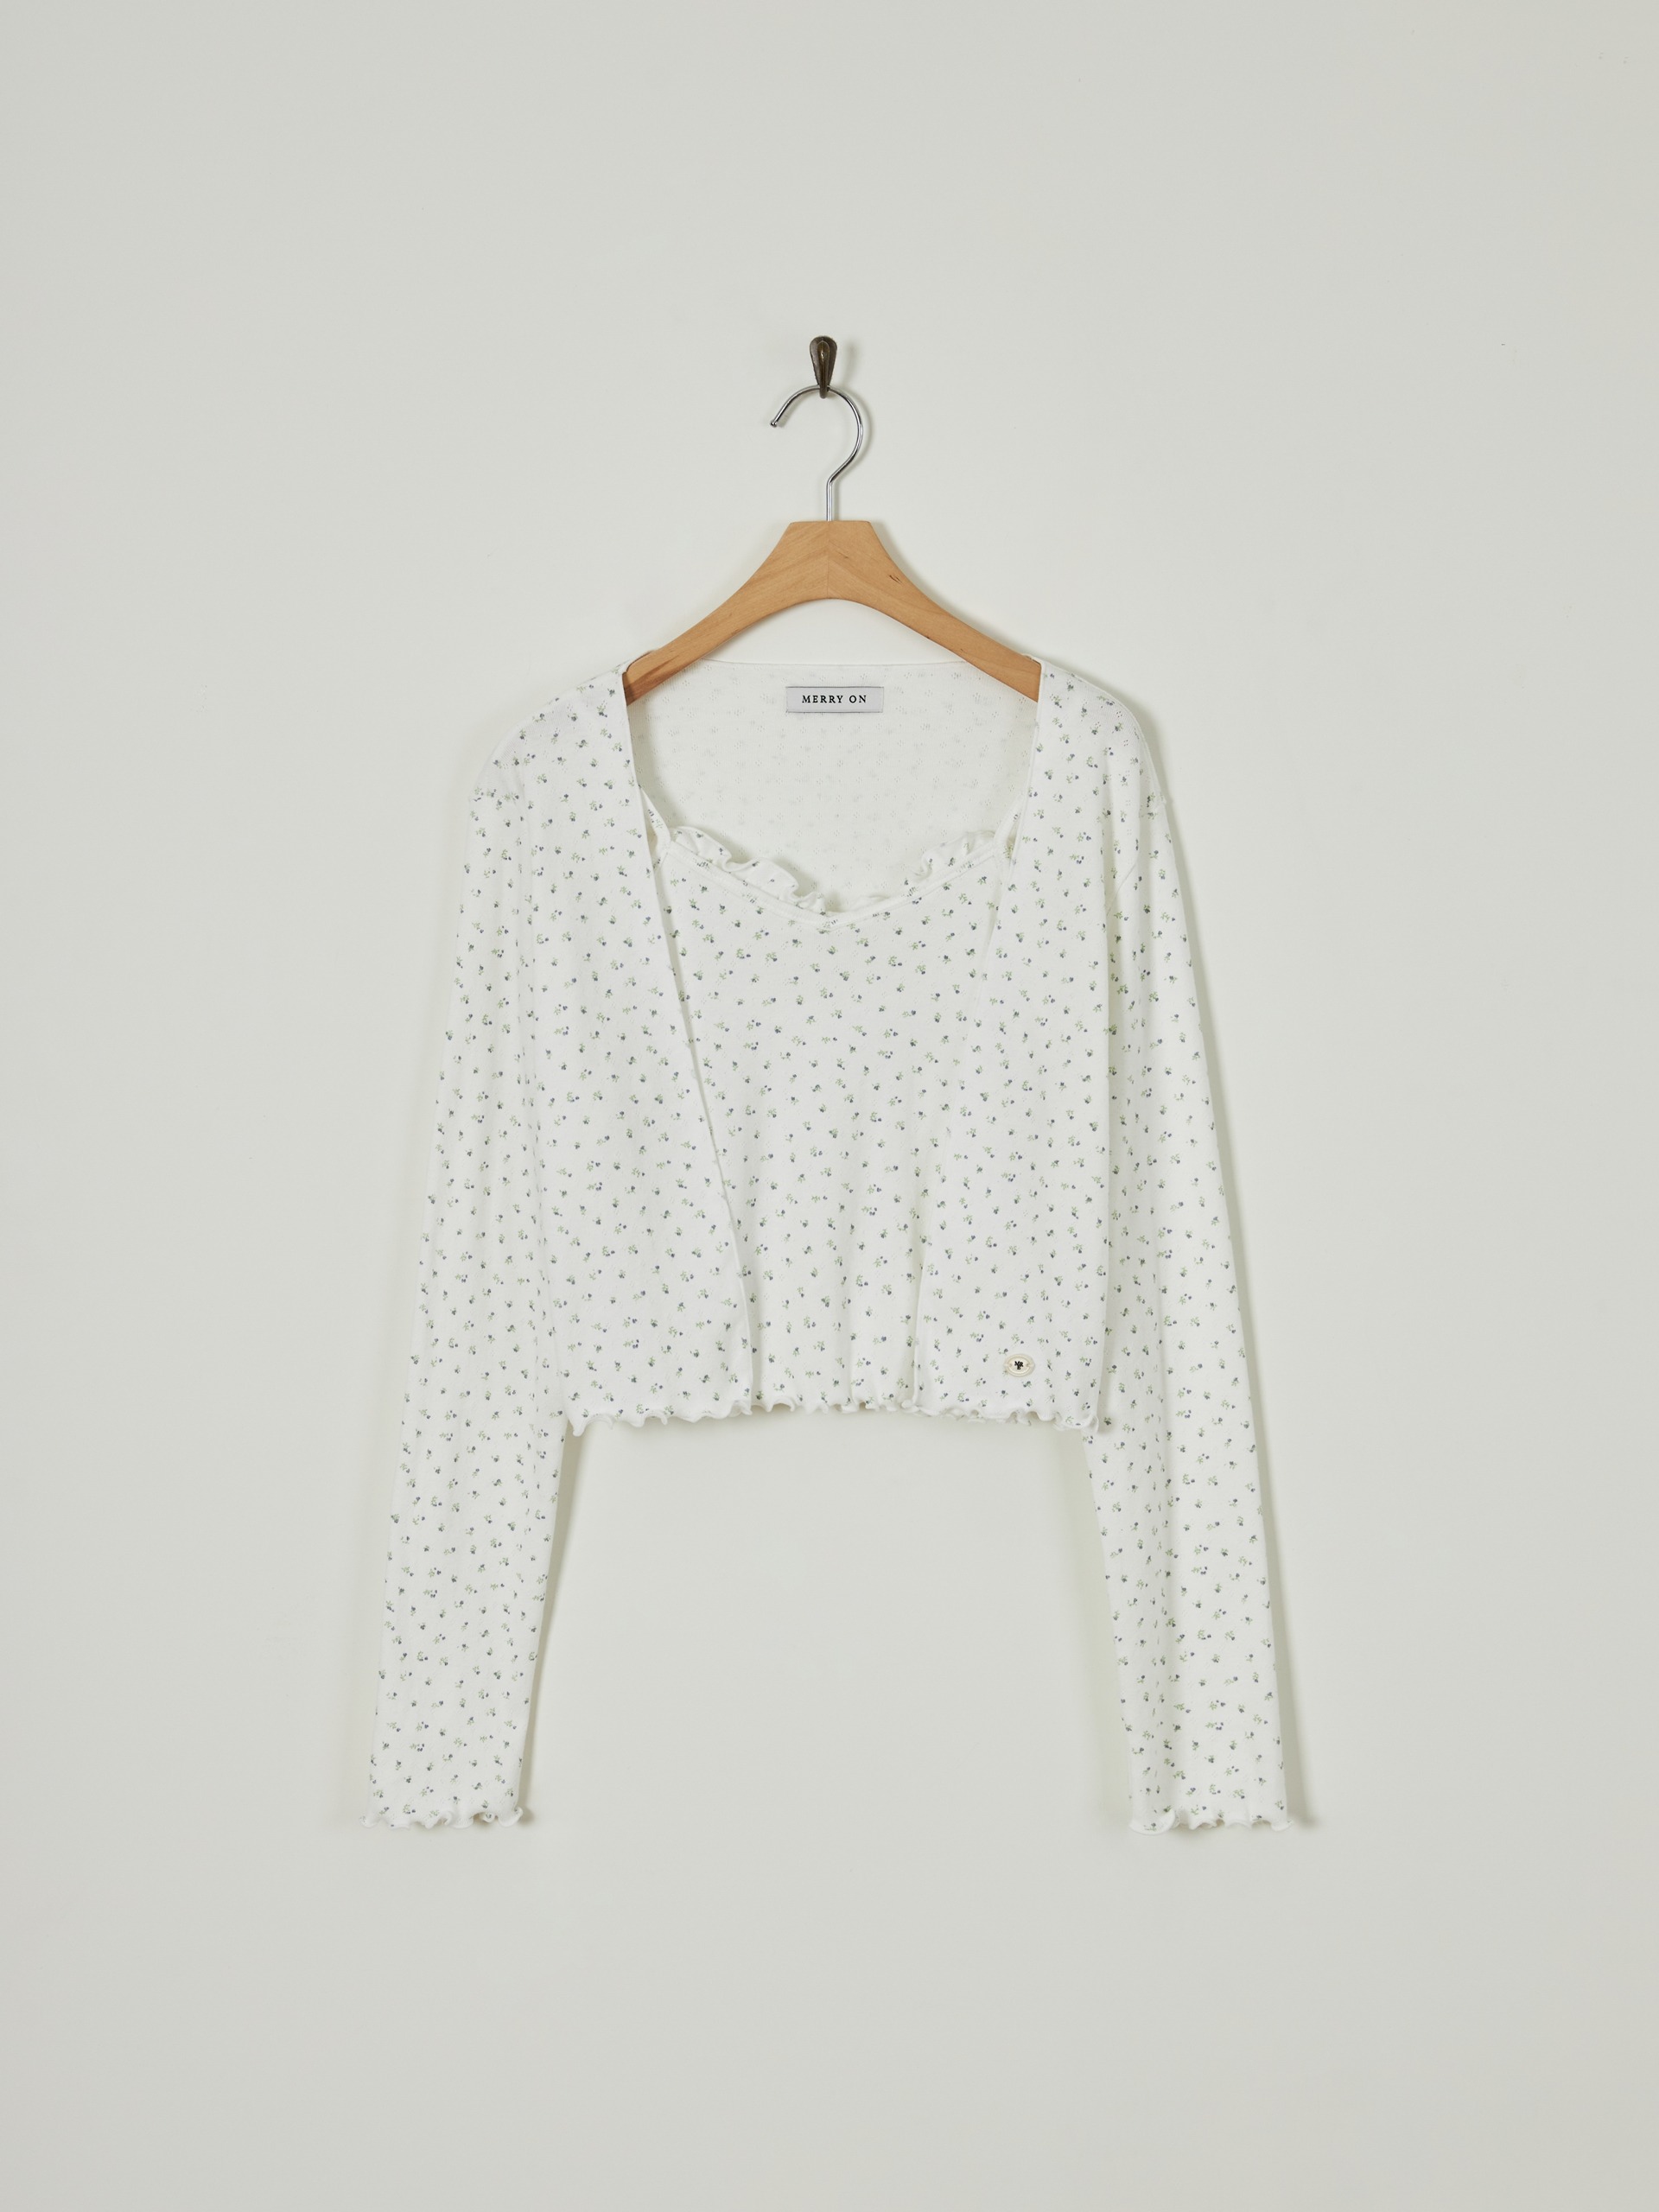 Berry sleeveless cardigan [IVORY][Departure today]